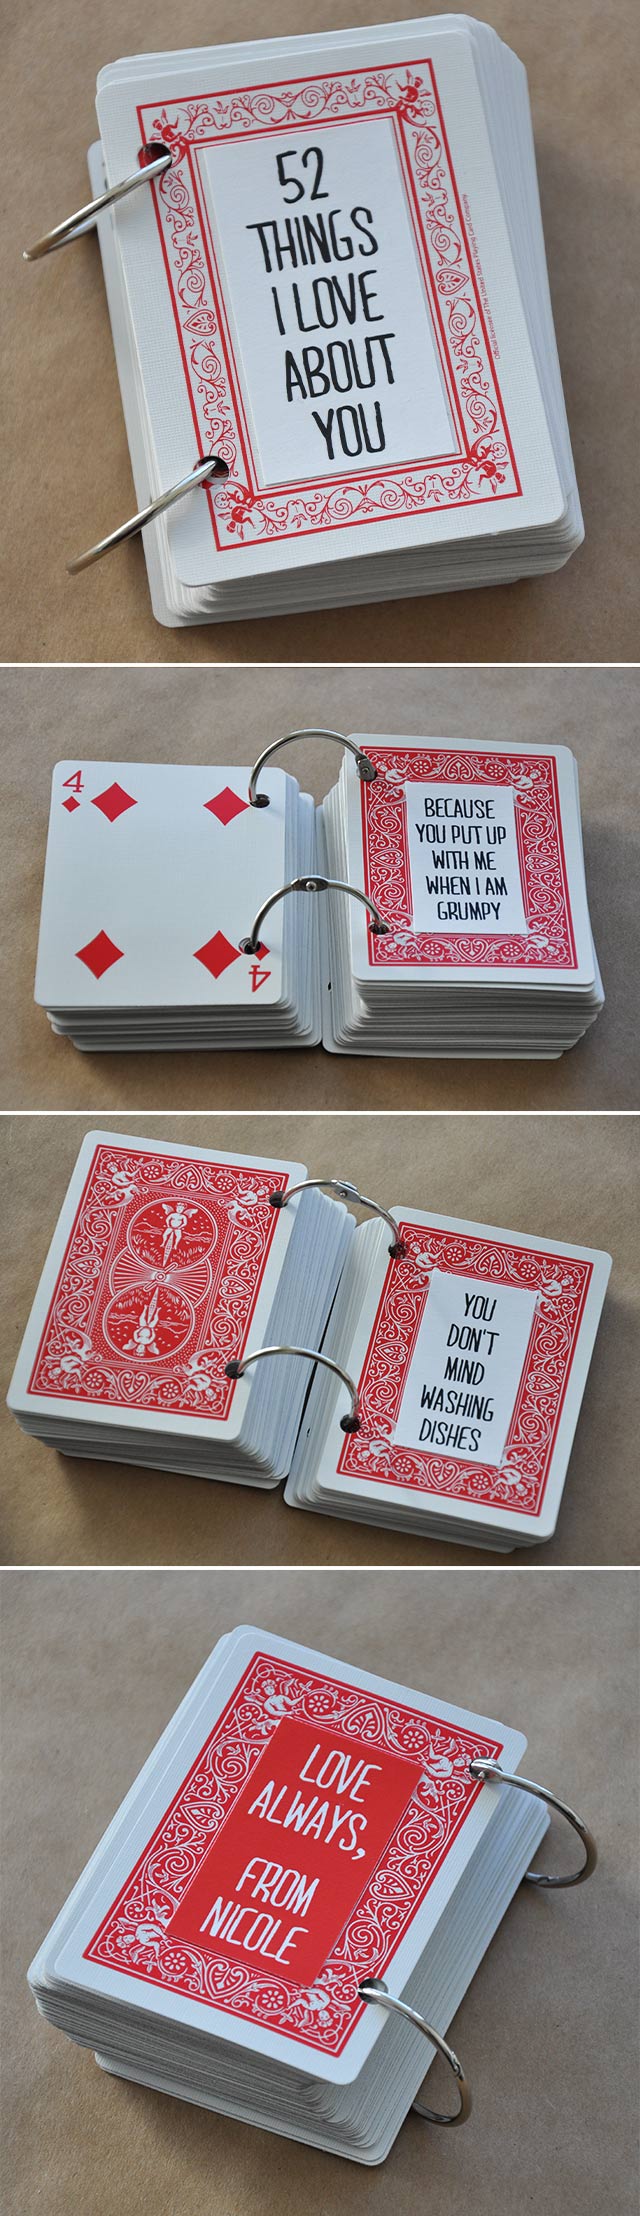 21 Things I Love About You • visual heart creative studio Within 52 Things I Love About You Deck Of Cards Template